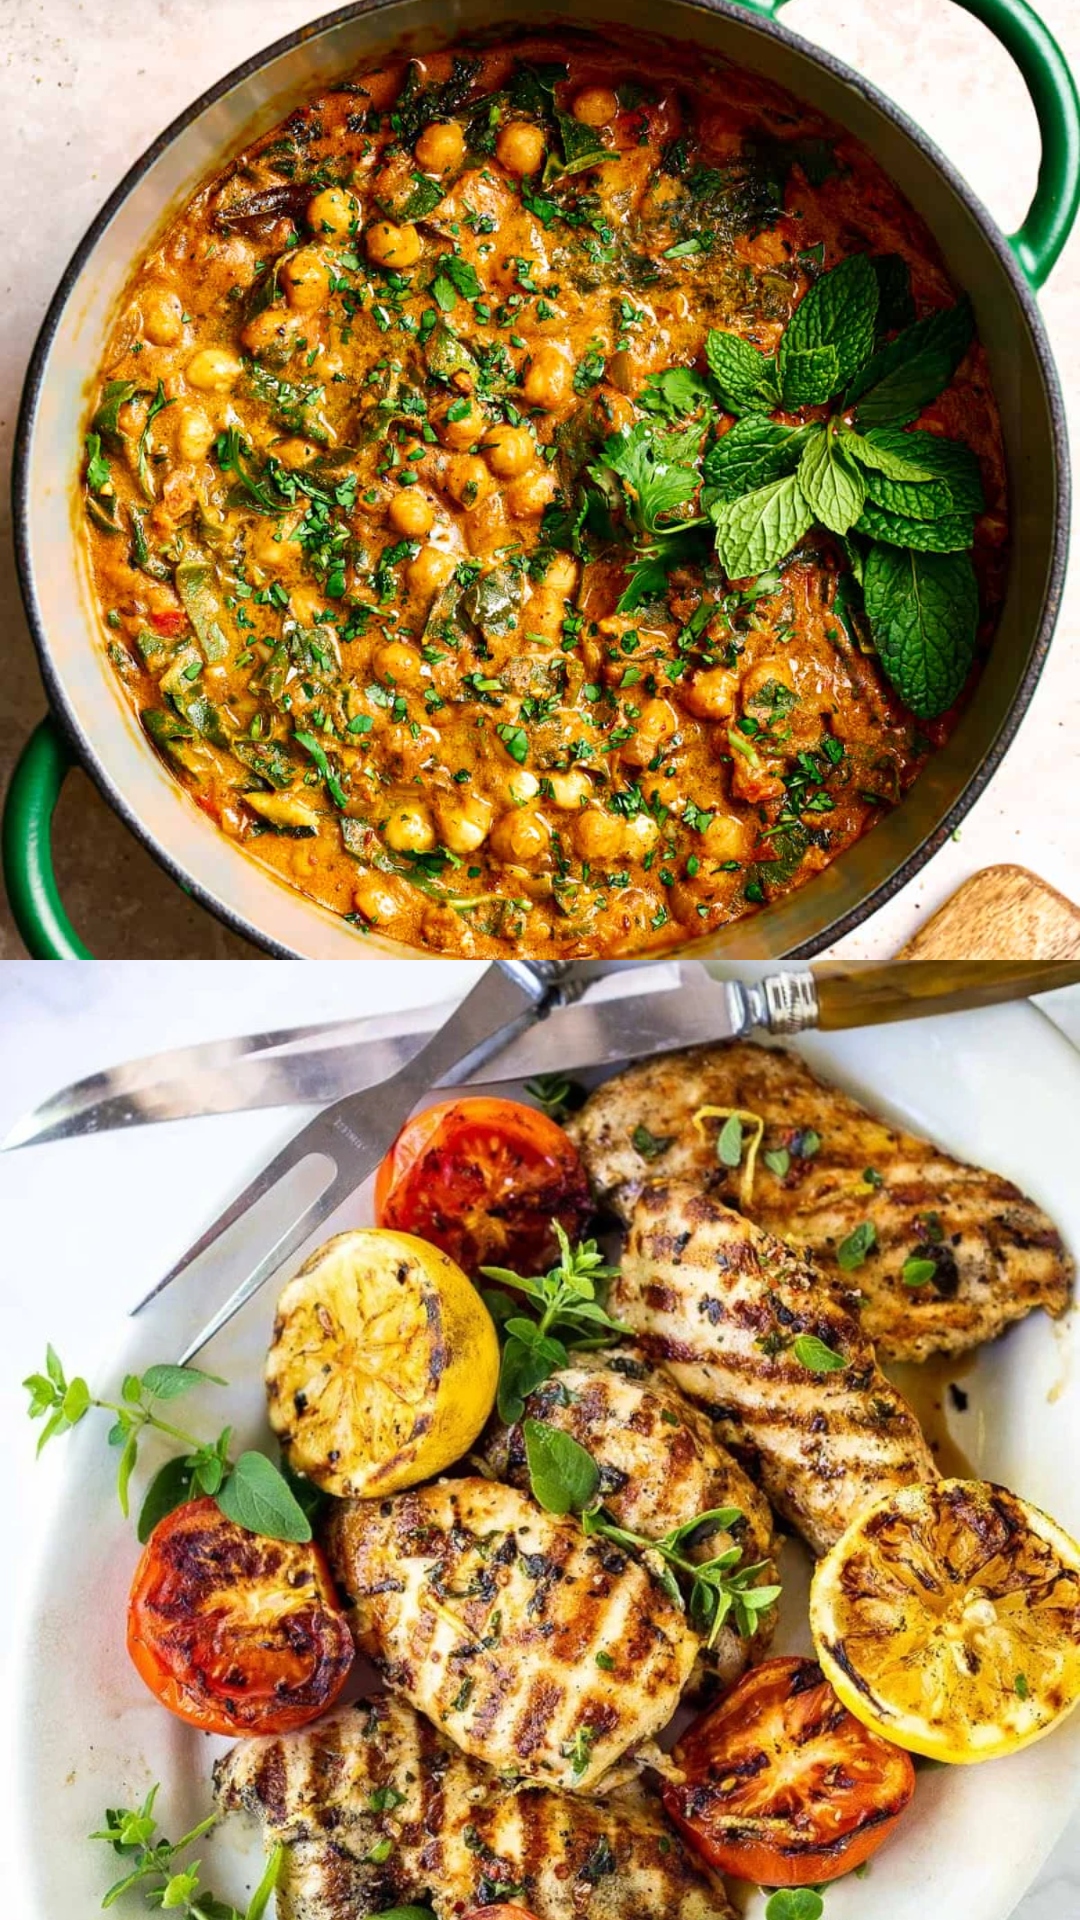 5 quick Indian dinner recipes to make in 15 minutes